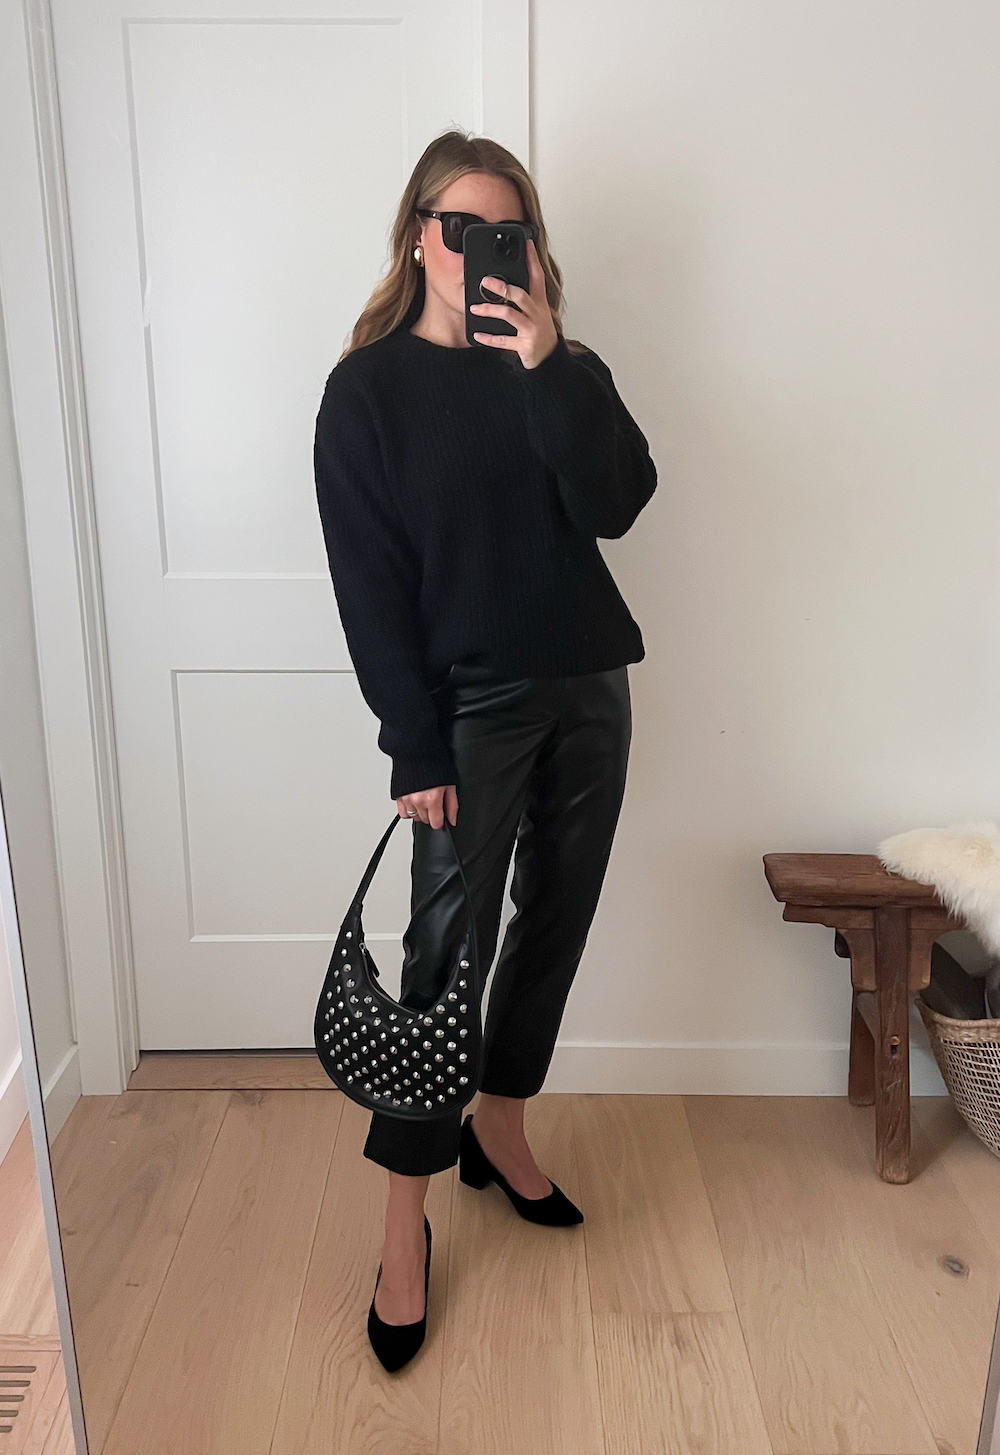 Christal wearing black leather pants with black heels and a black sweater.